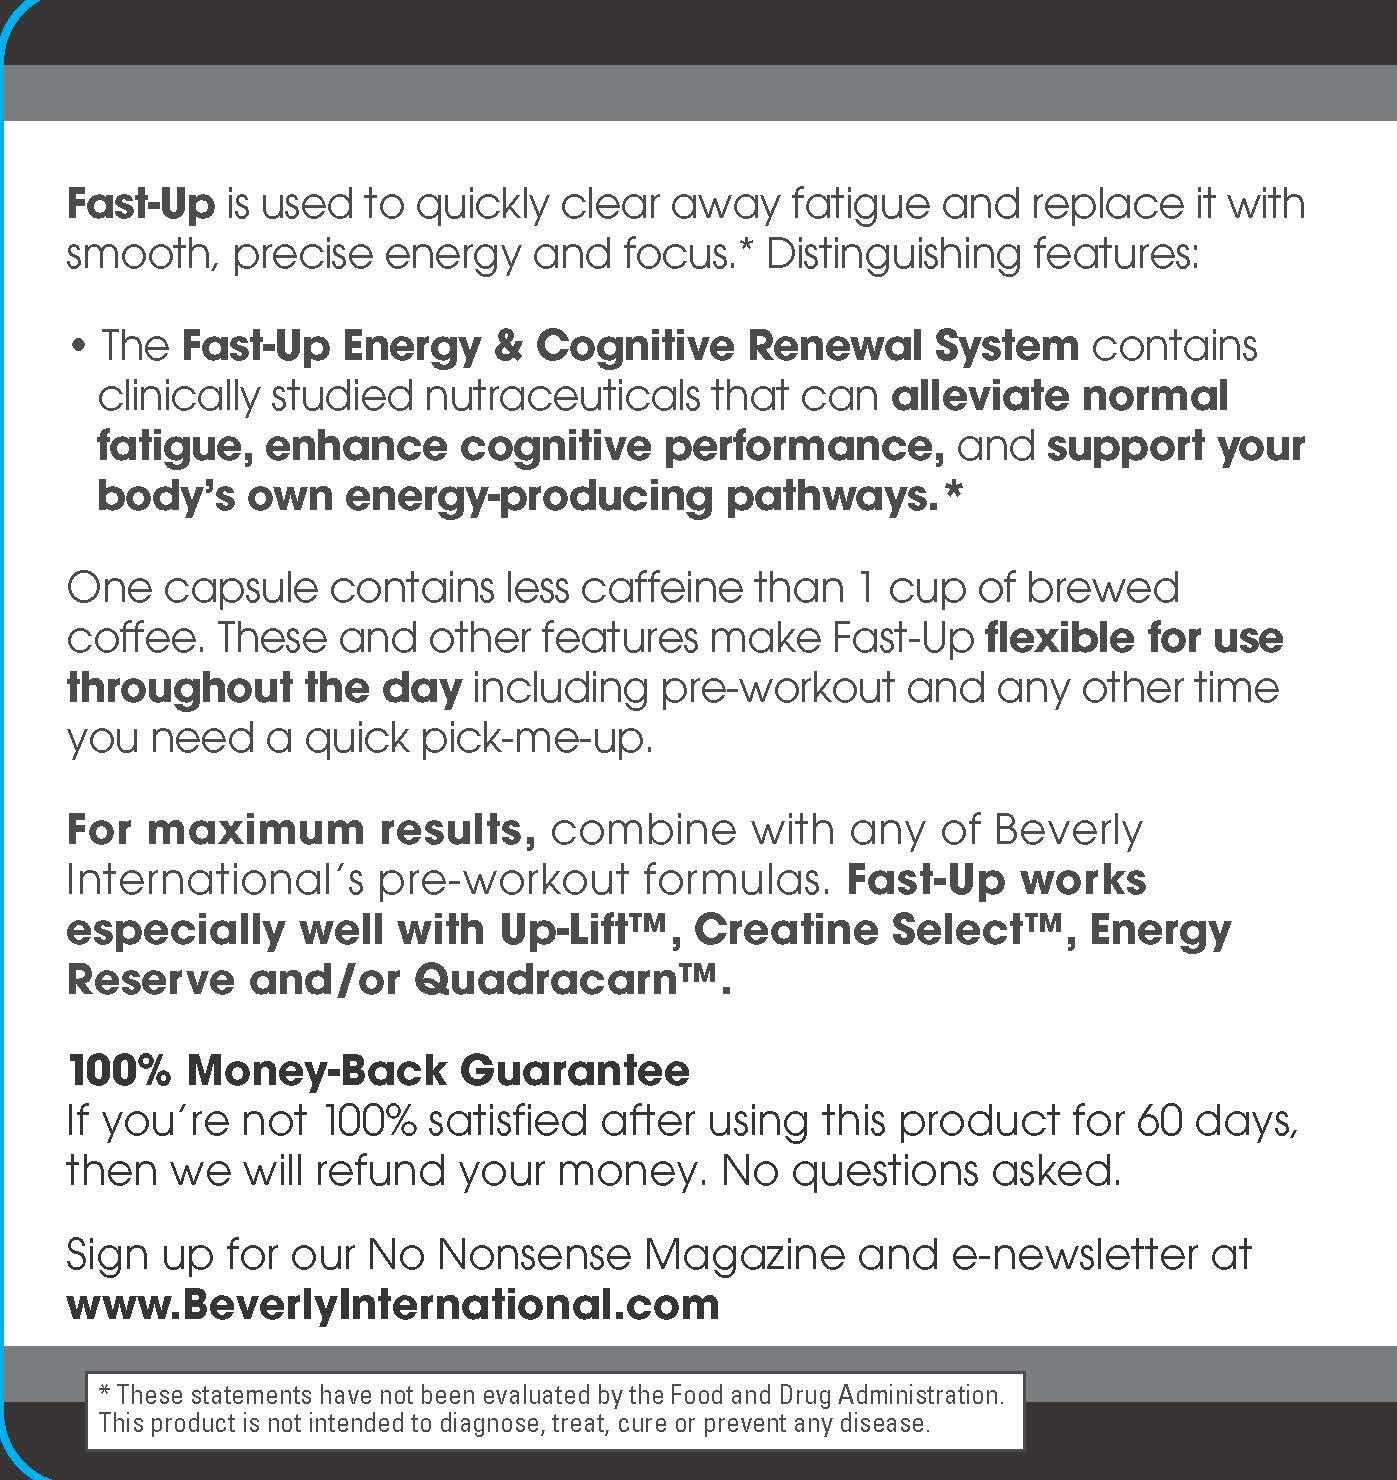 Beverly International Fast-Up, 90 Capsules. Feel-Better, Get Clarity, Clear Focus-Brain Booster. Ups Mood, New Energy, Pre-Workout Fuel, Motivation and Cognitive Performance in Moments.